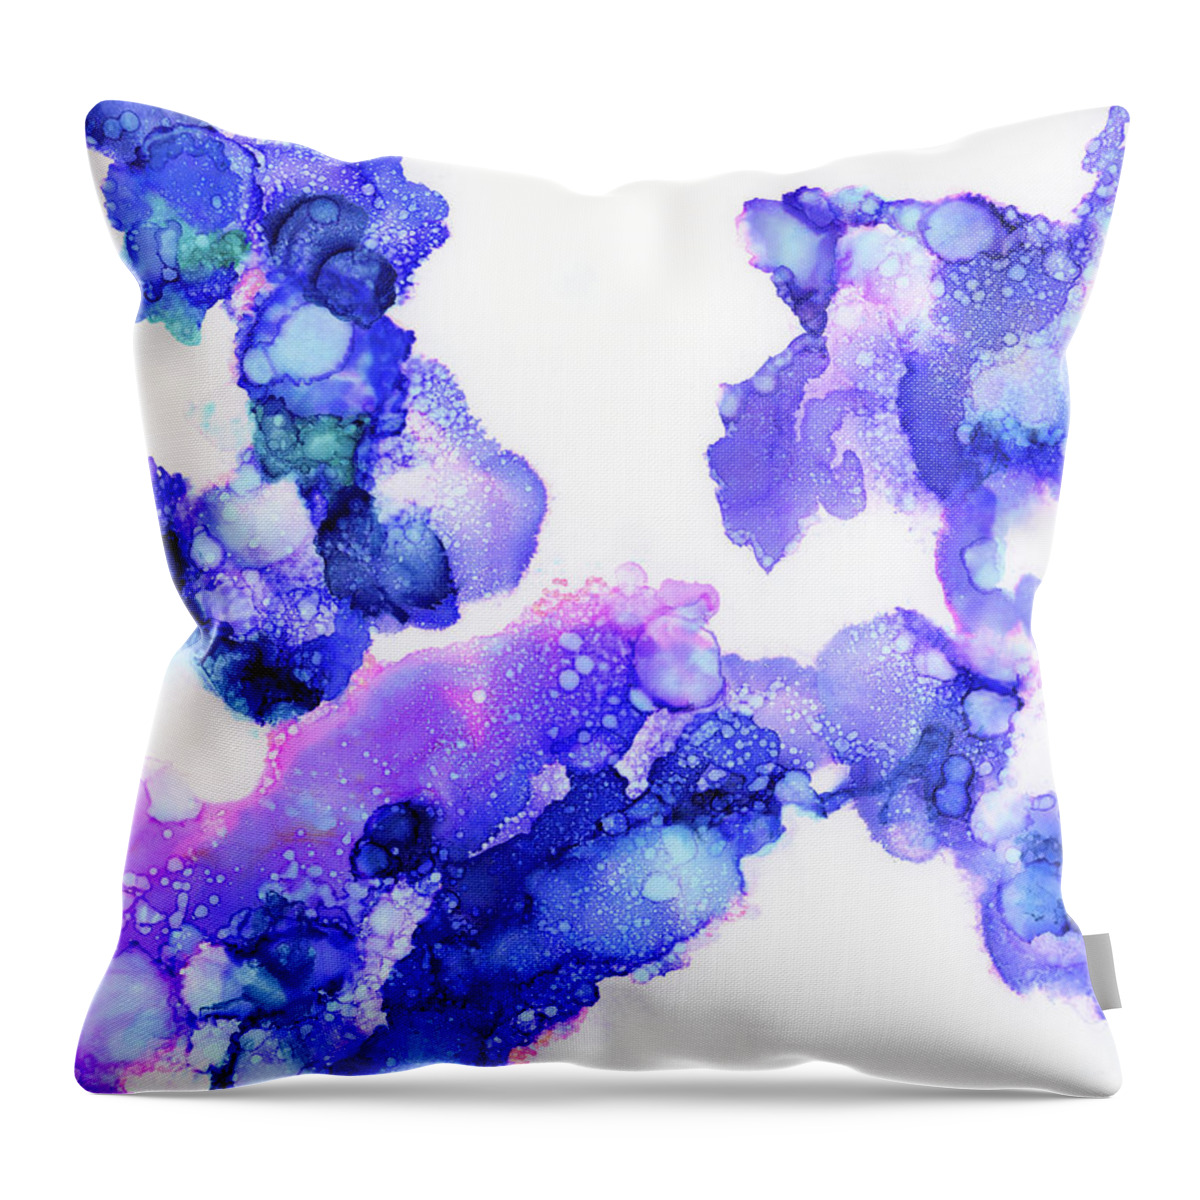 Blue Throw Pillow featuring the painting Blueberry Blush by Tamara Nelson